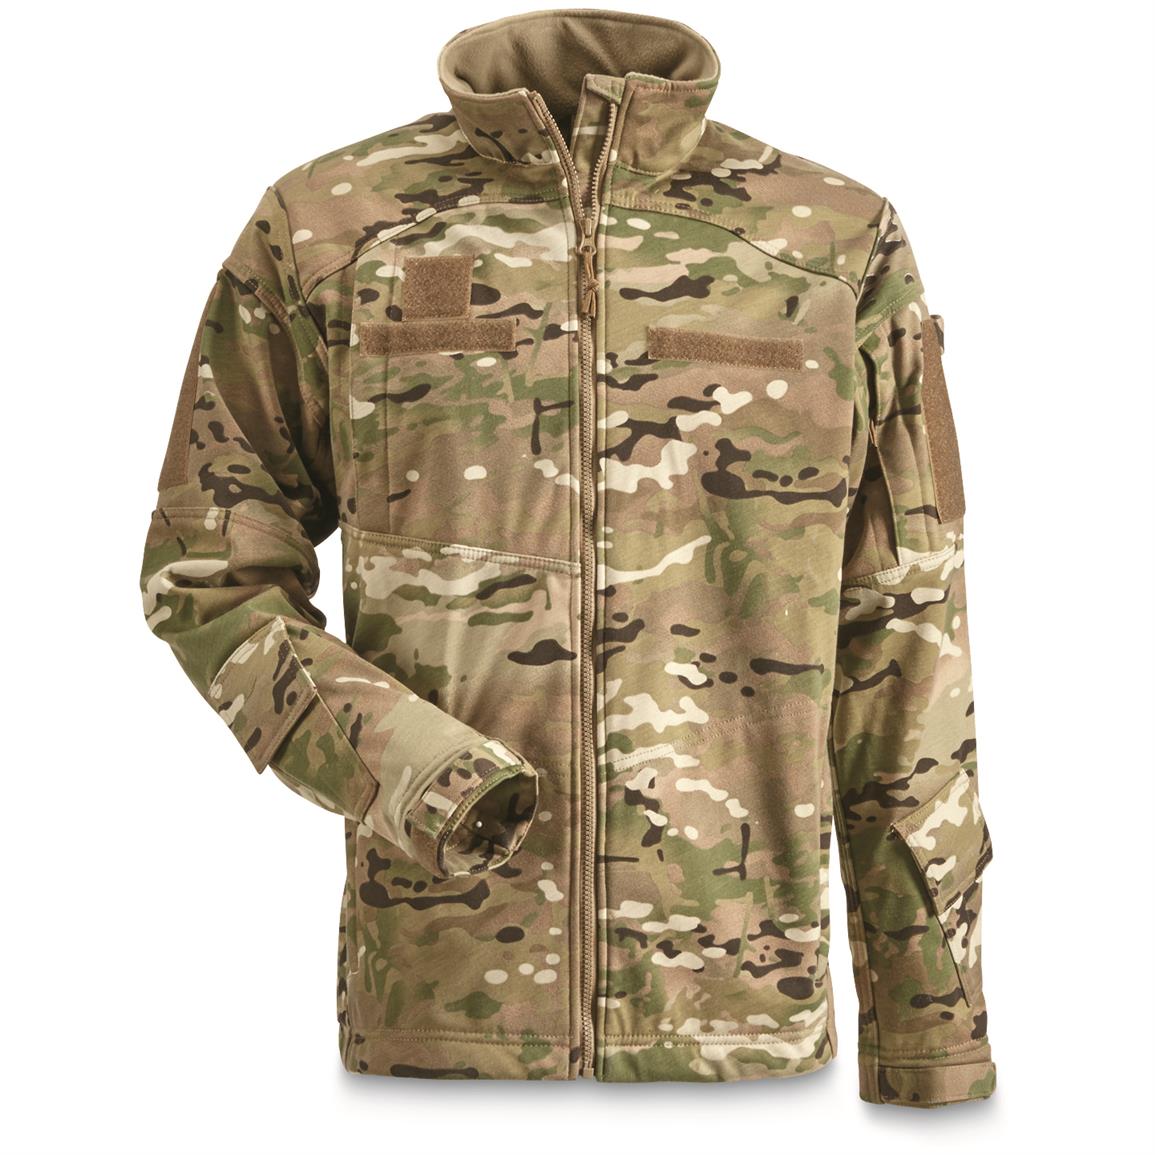 U S Military Surplus Lwol Ocp Camo Jacket New Insulated Military Jackets At Sportsman S Guide